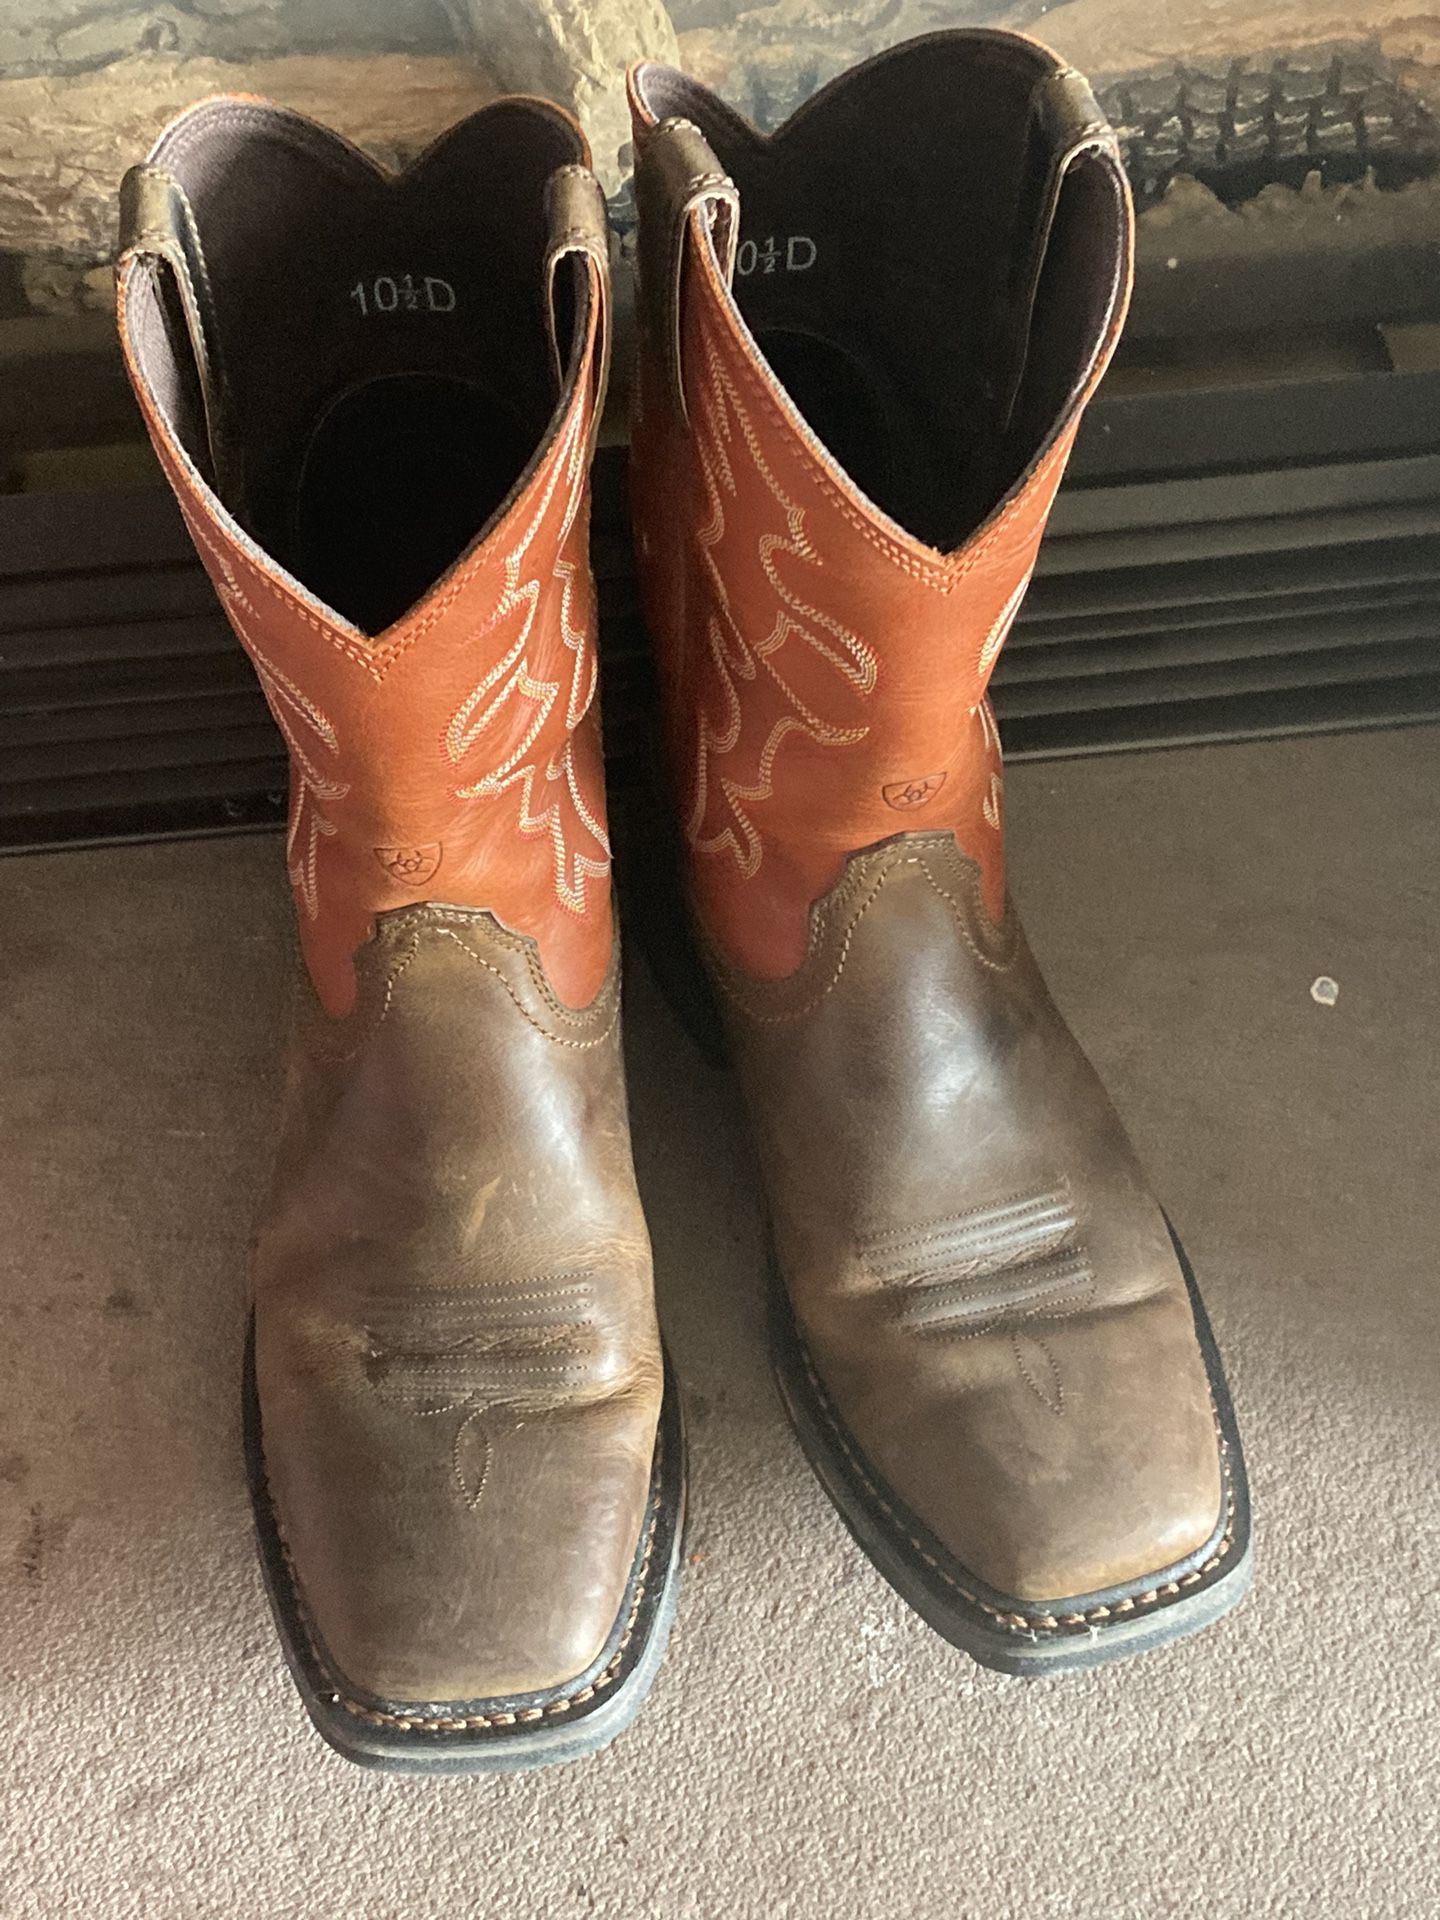 Excellent Condition Like New Ariat  WorkHog Work Boots 10.5D